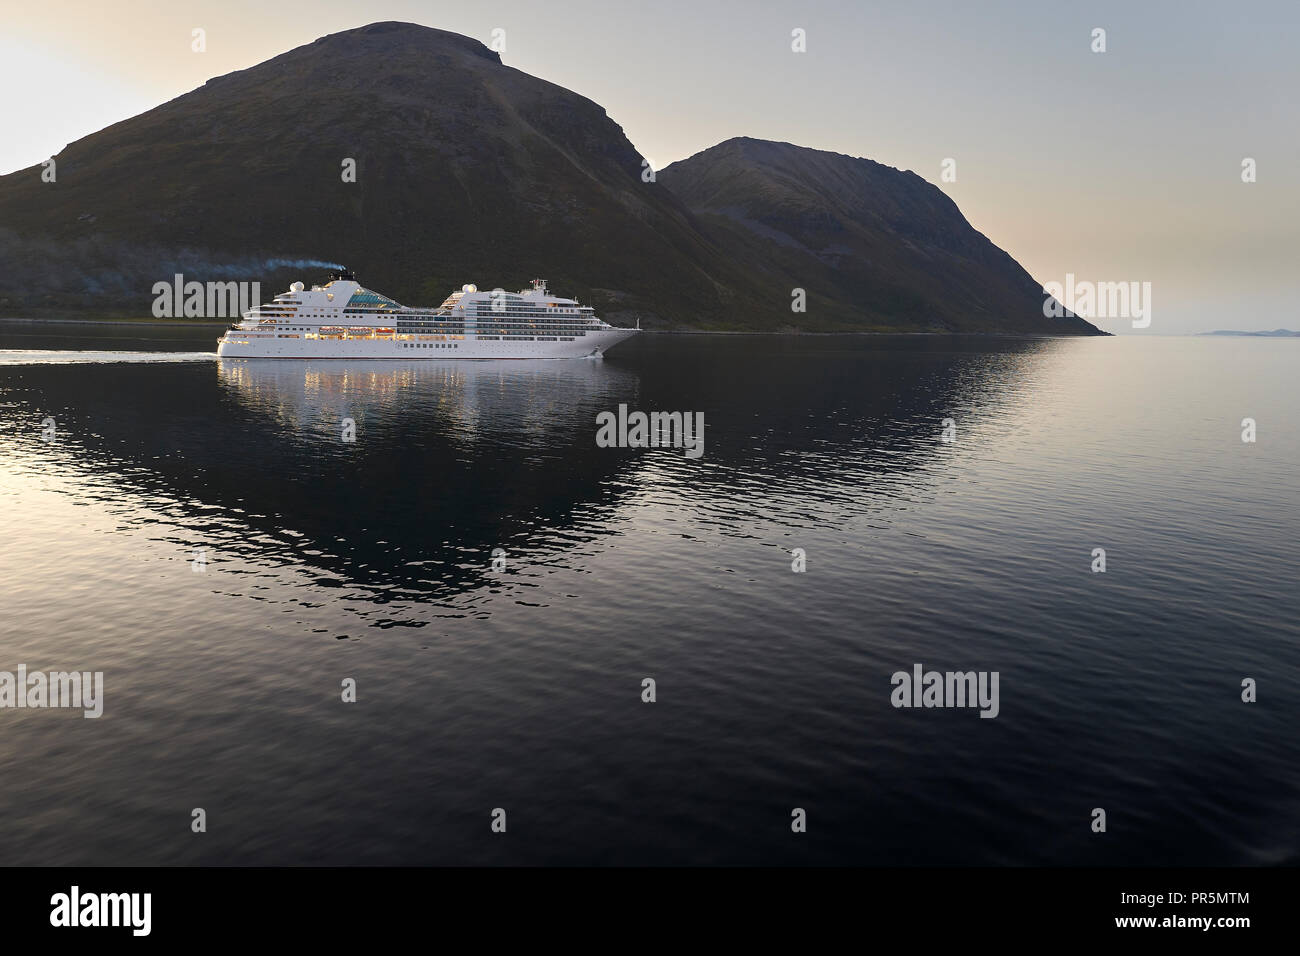 The Cruise Ship, Seabourn Ovation, Sails Through The Lauksundet, Close To Skjervøy, Far North Of The Norwegian Arctic Circle During The Midnight Sun. Stock Photo